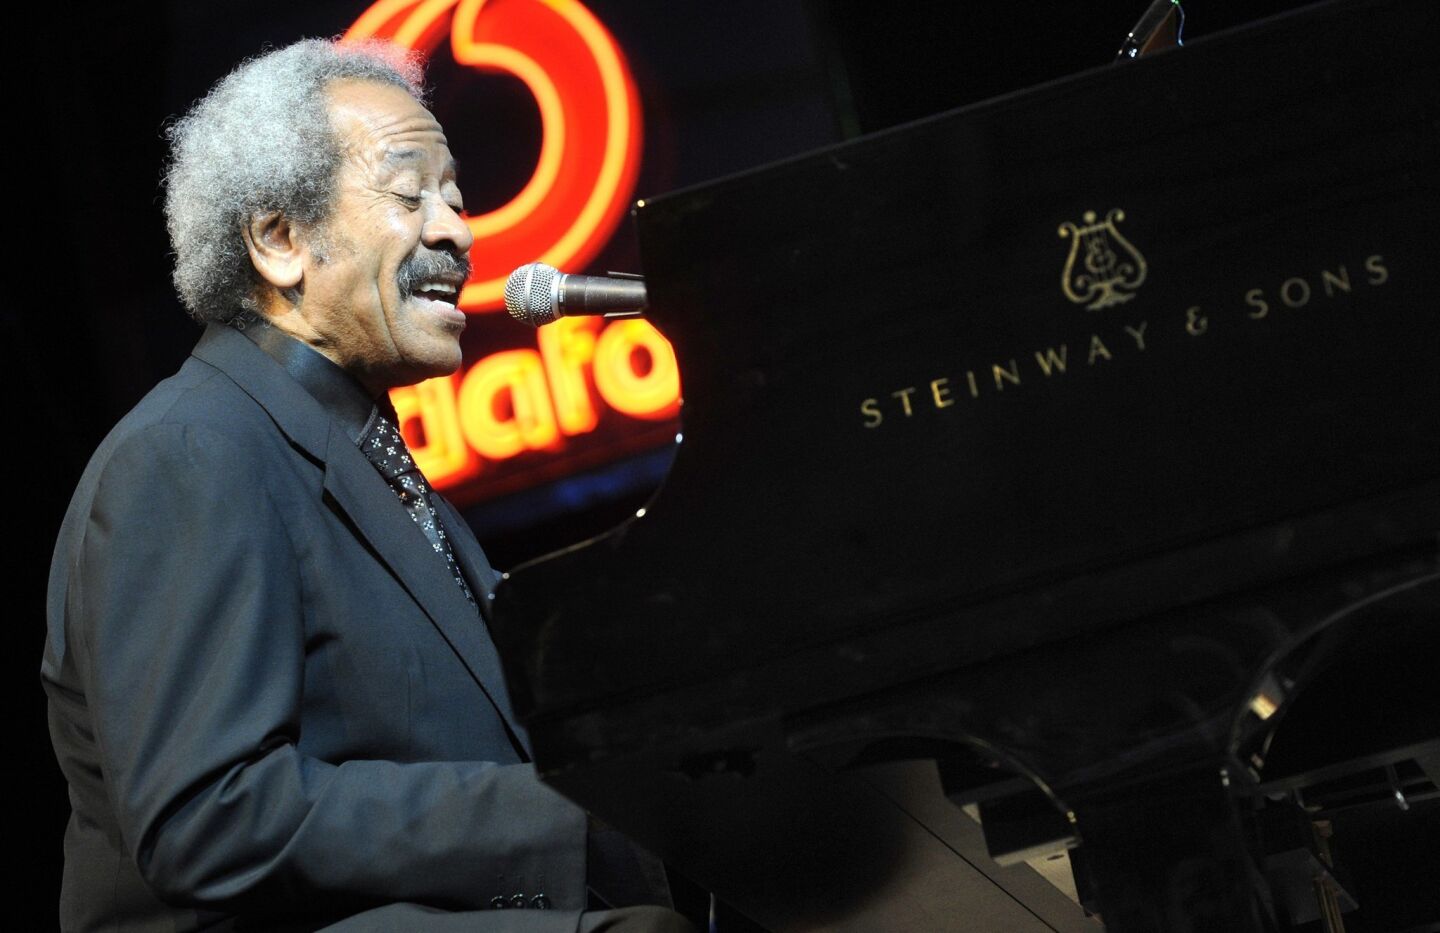 Allen Toussaint performs at the Jazz Vitoria festival in Vitoria, Spain, in 2009. The musician died this week shortly after giving a performance in Madrid.